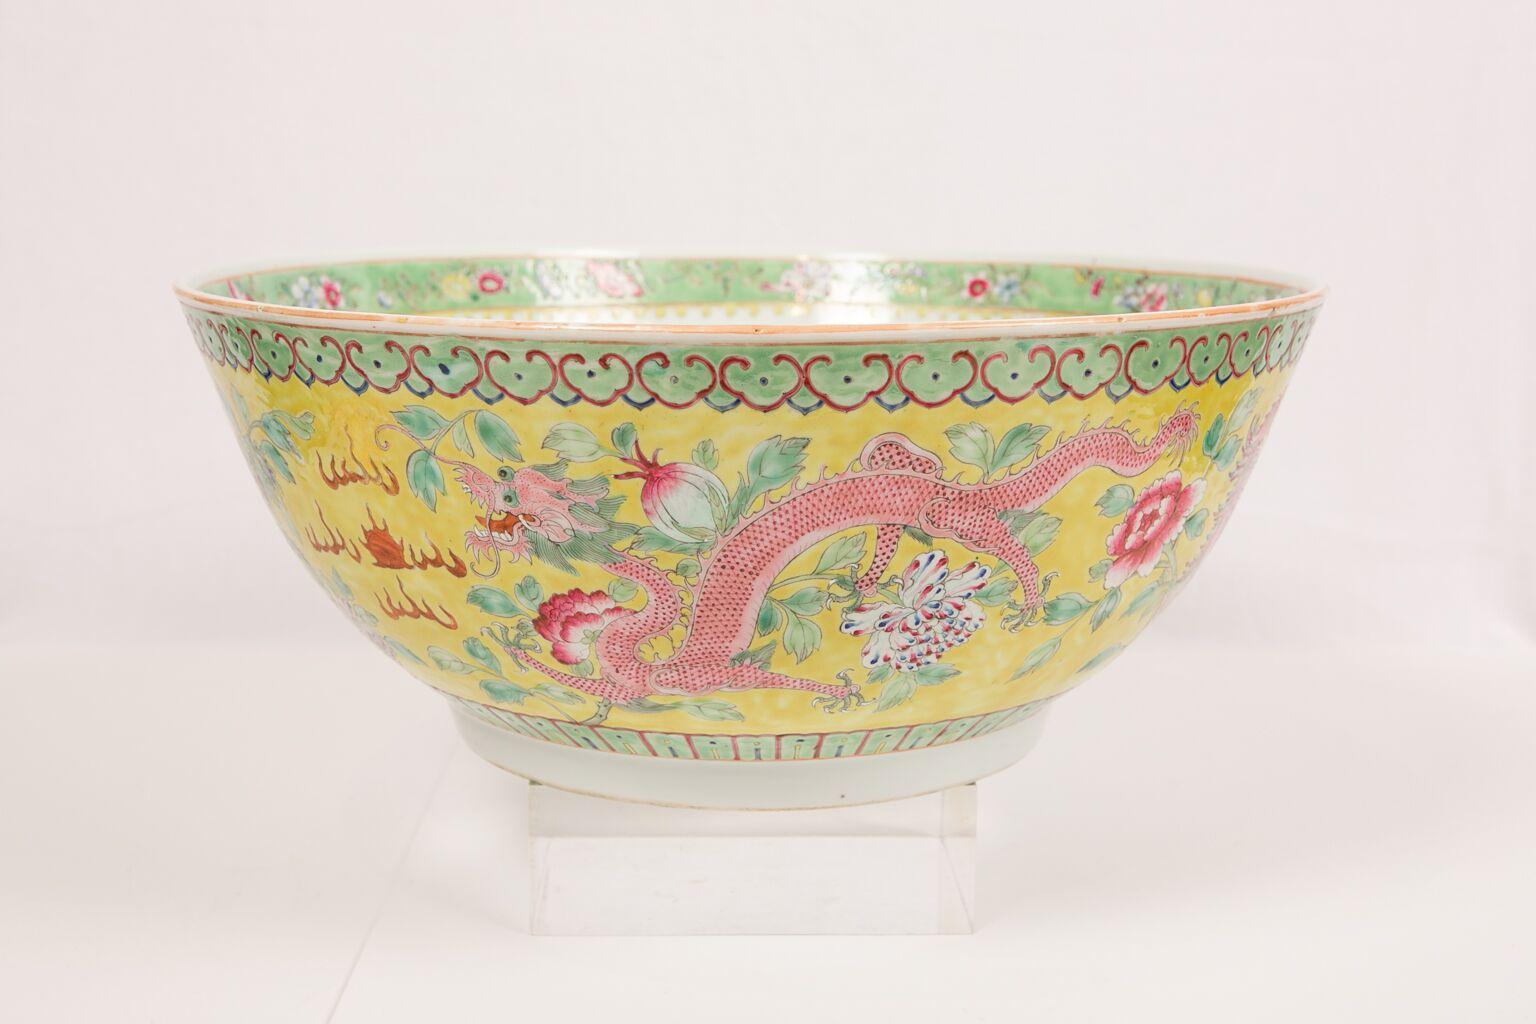 WHY WE LOVE IT: Dragons and Phoenixes and Fabulous Colors! 
 This marvelous and brightly colored punch bowl was made in the Republican era in the 1920s before stylistic changes in the 1930s.
We are delighted to offer this large and beautiful Chinese